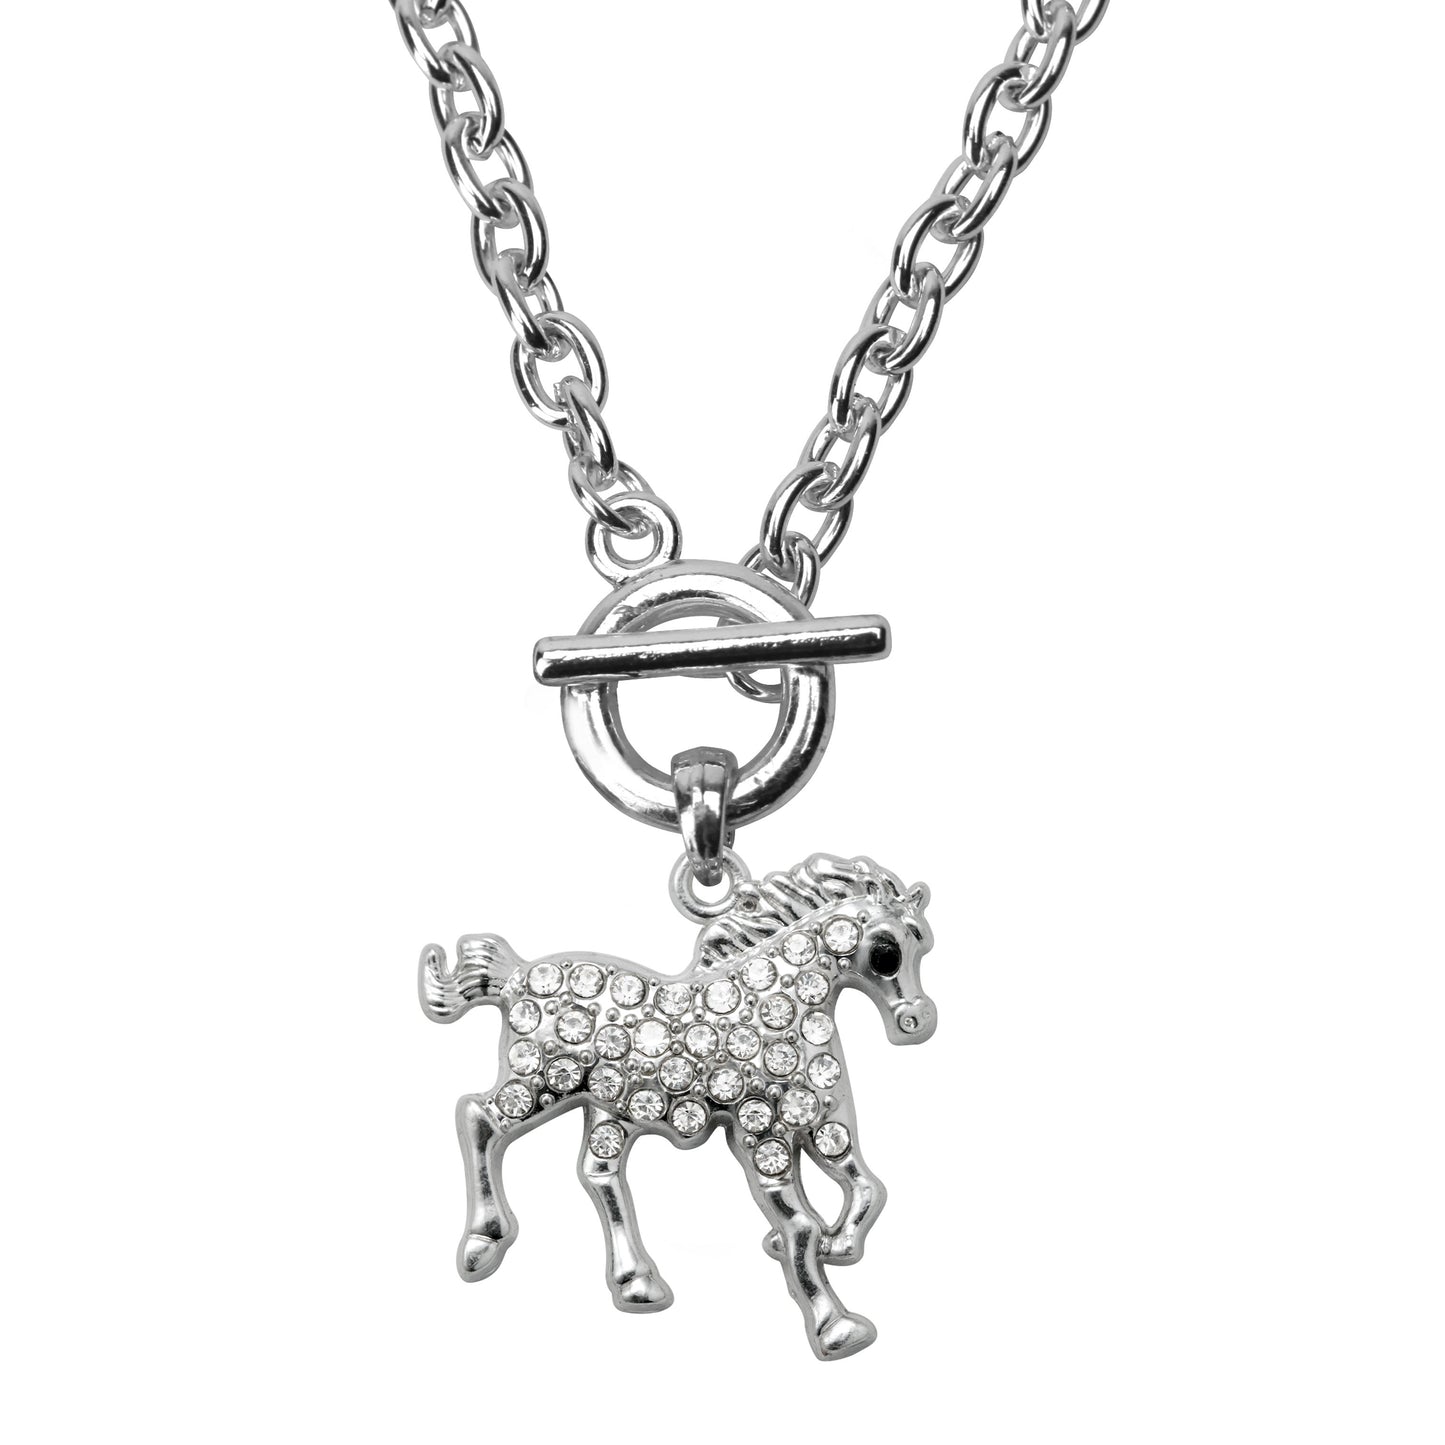 Silver Galloping Horse Charm Toggle Necklace